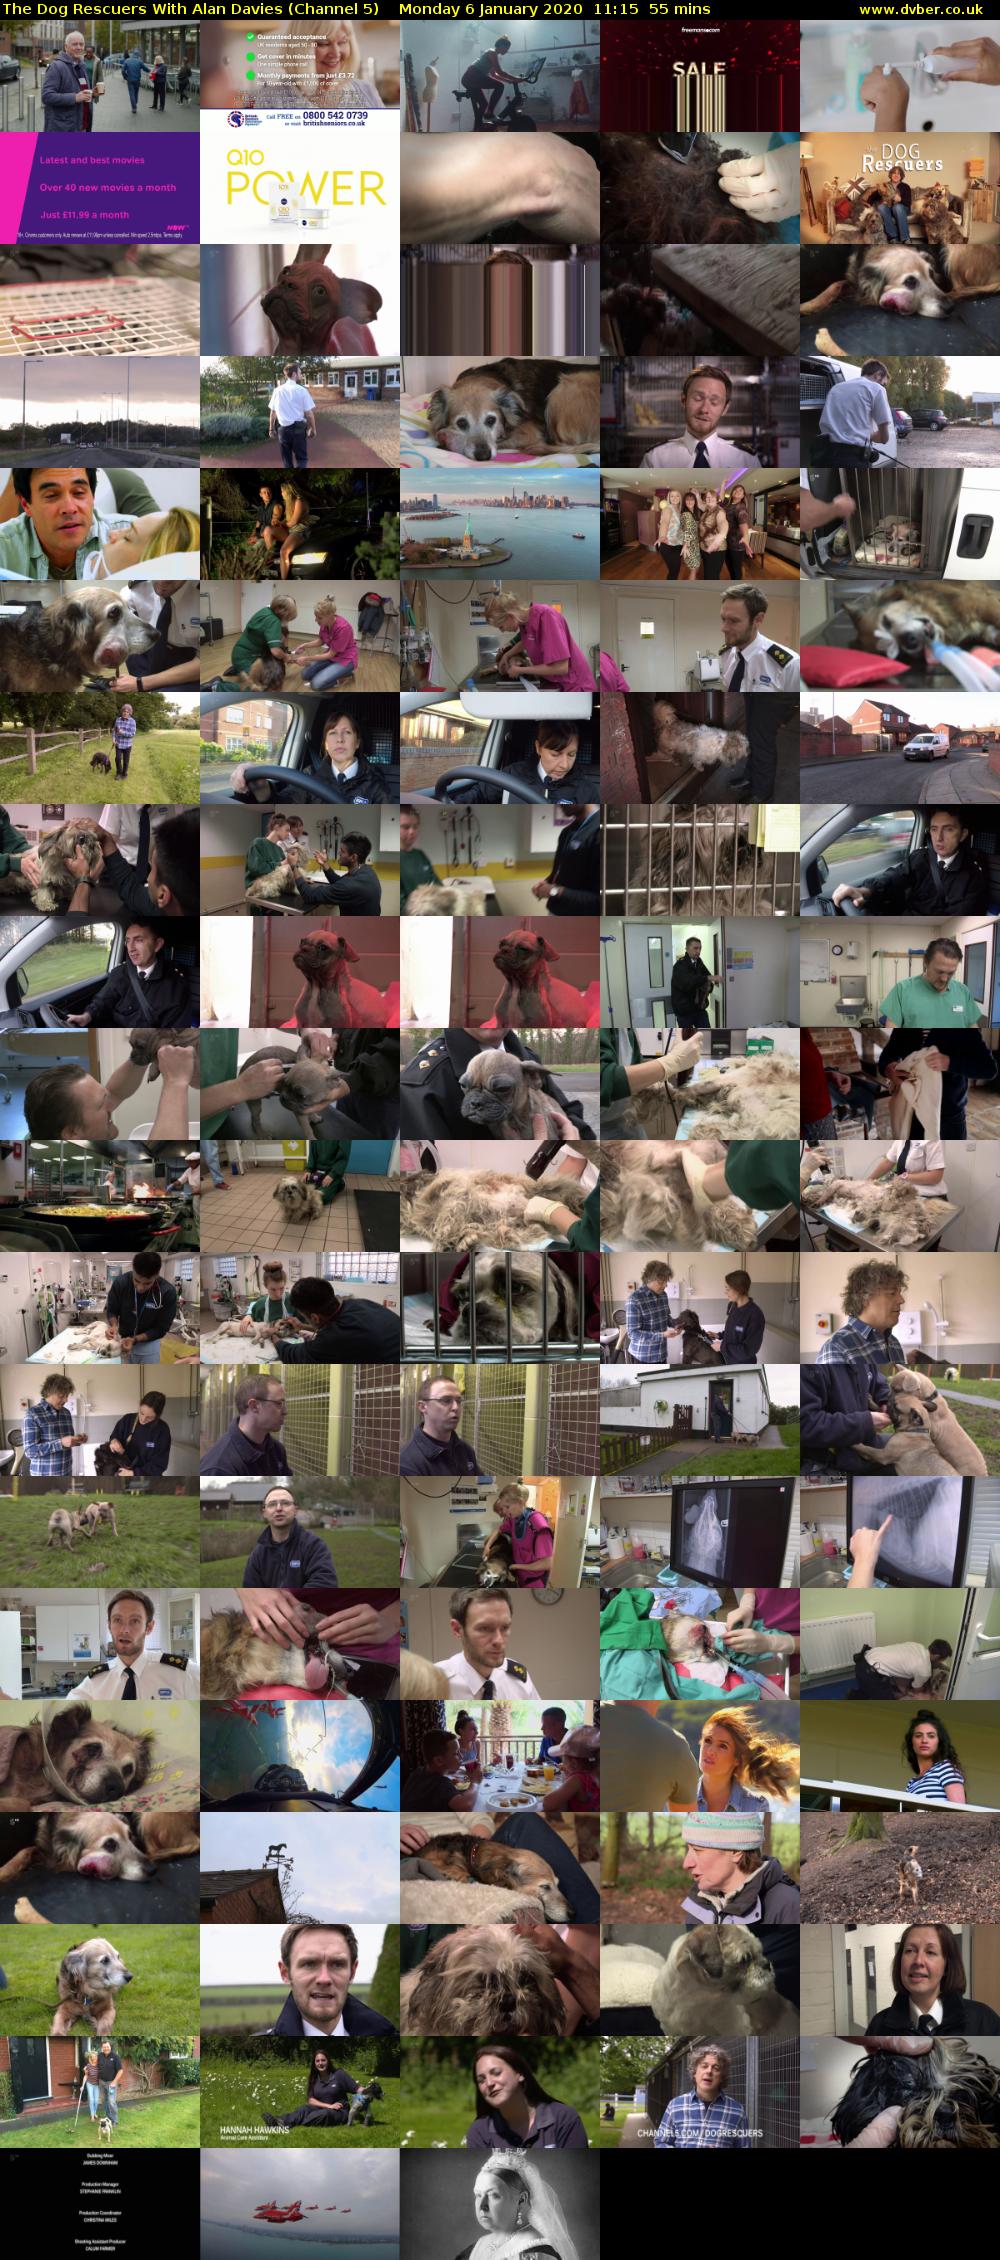 The Dog Rescuers With Alan Davies (Channel 5) Monday 6 January 2020 11:15 - 12:10